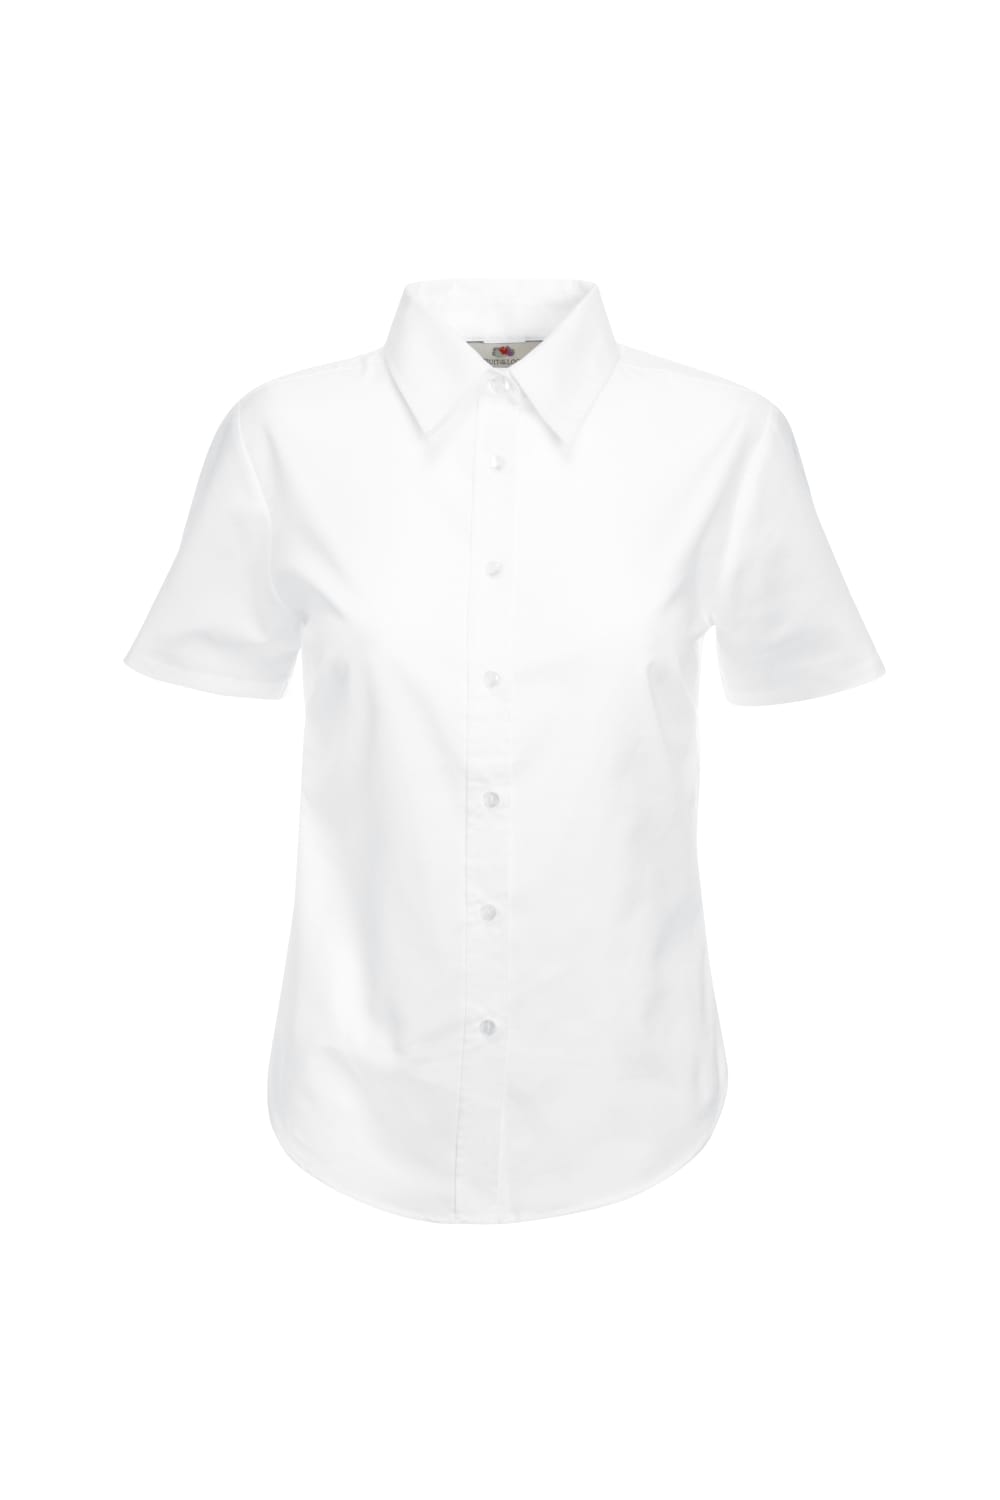 Fruit Of The Loom Ladies Lady-Fit Short Sleeve Oxford Shirt (White)